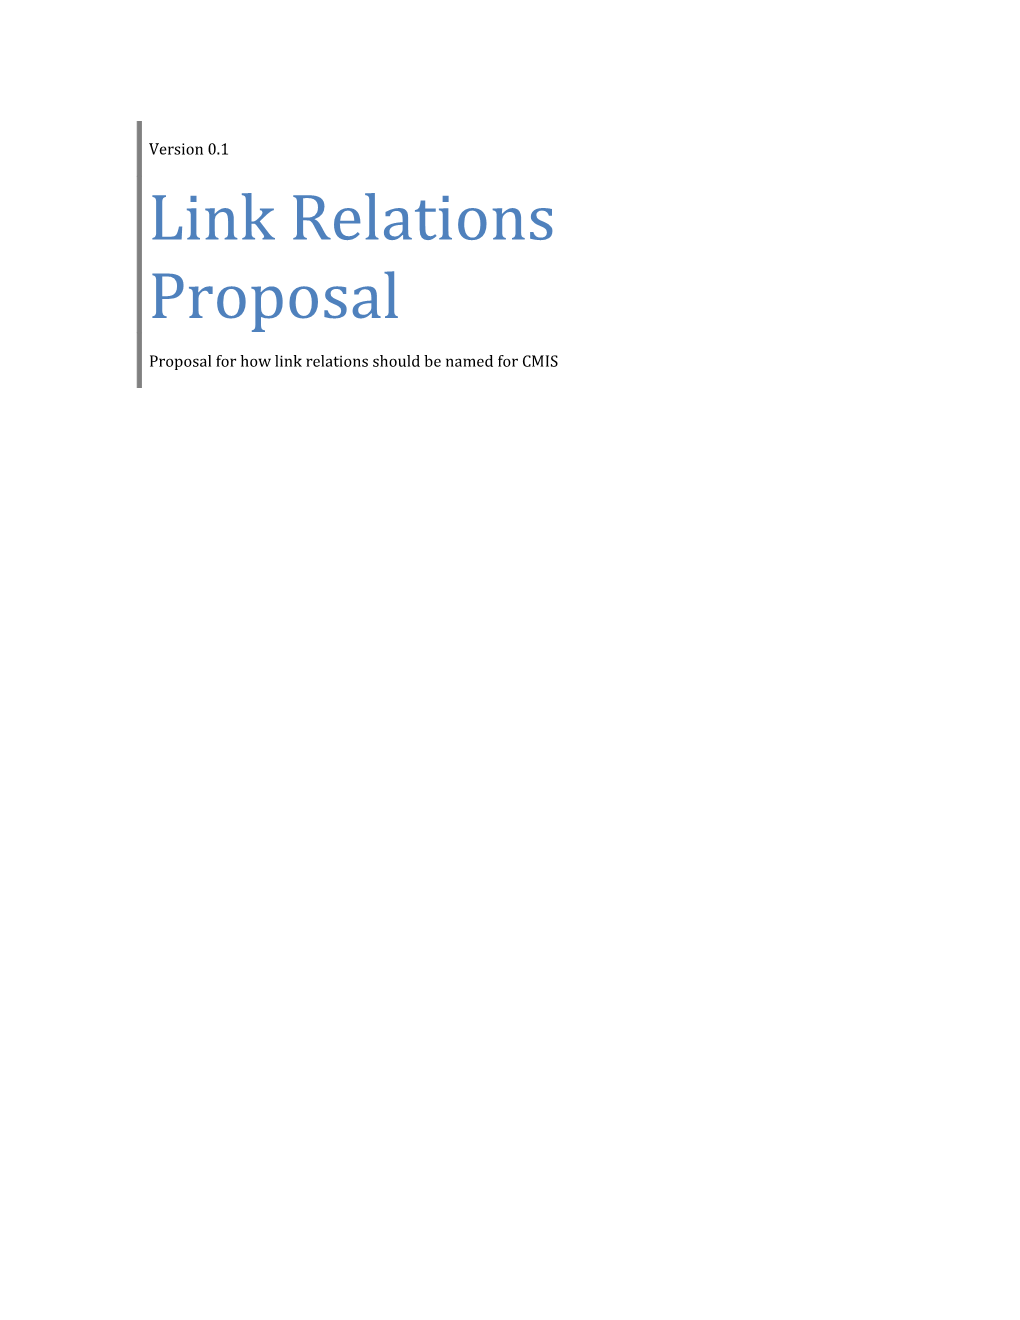 Link Relations Proposal